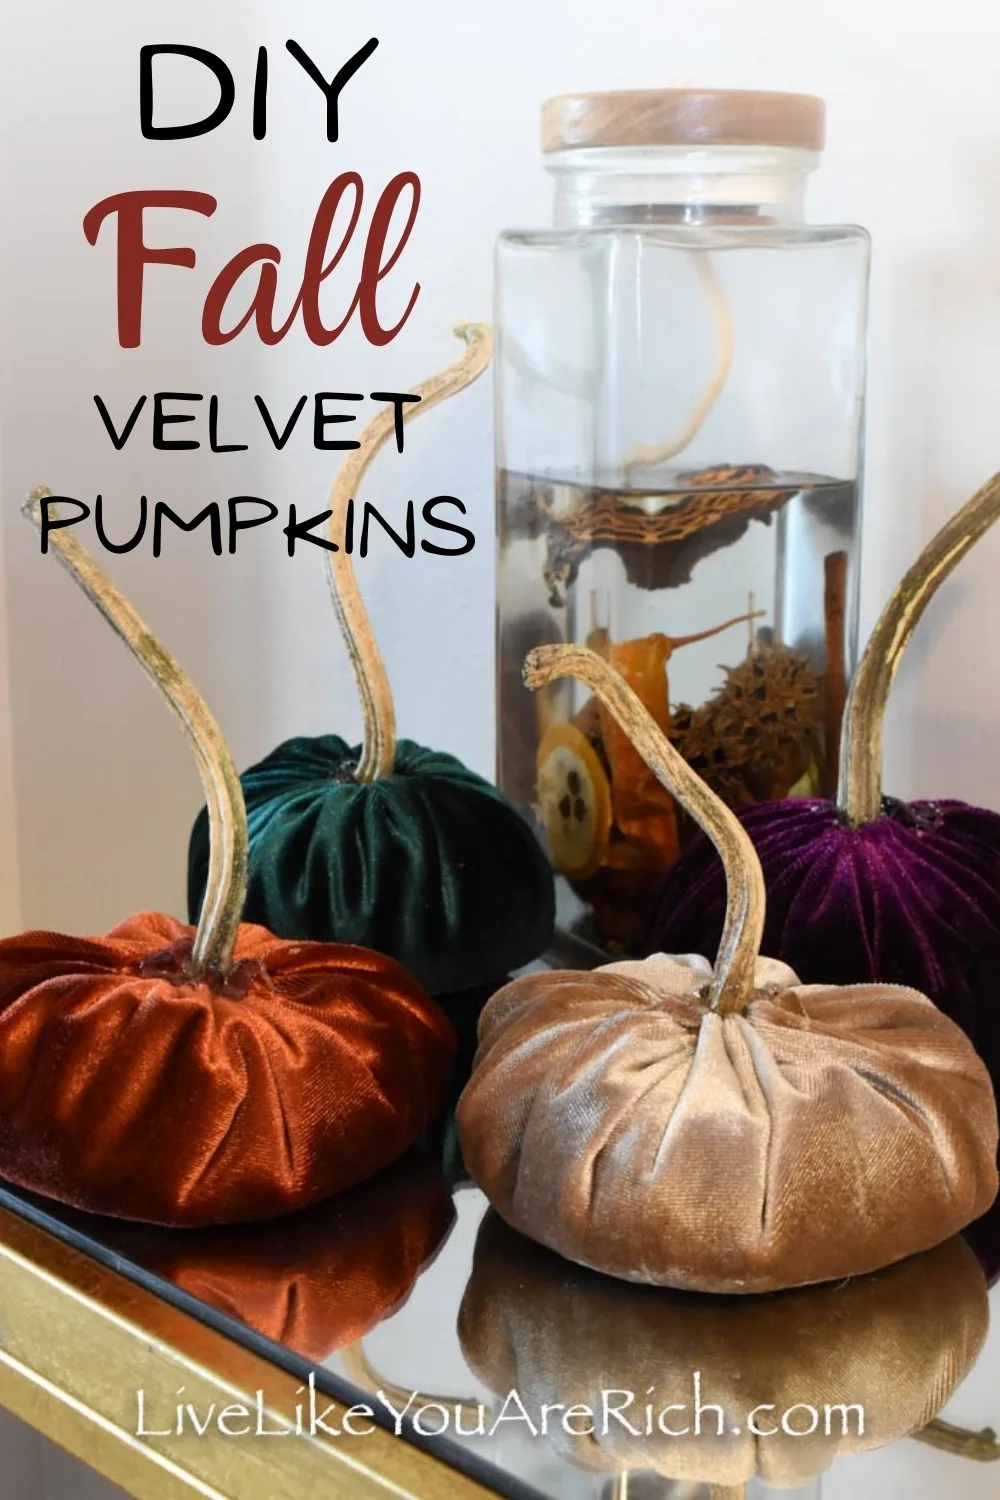 Looking for fun craft to make with your kids? These DIY Fall velvet pumpkins are inexpensive and simple to make. My six year old daughter and I put them together in less than 45 minutes. This would make such a group craft and also a fun craft to make with kids. #fall #fallcraft #pumpkin